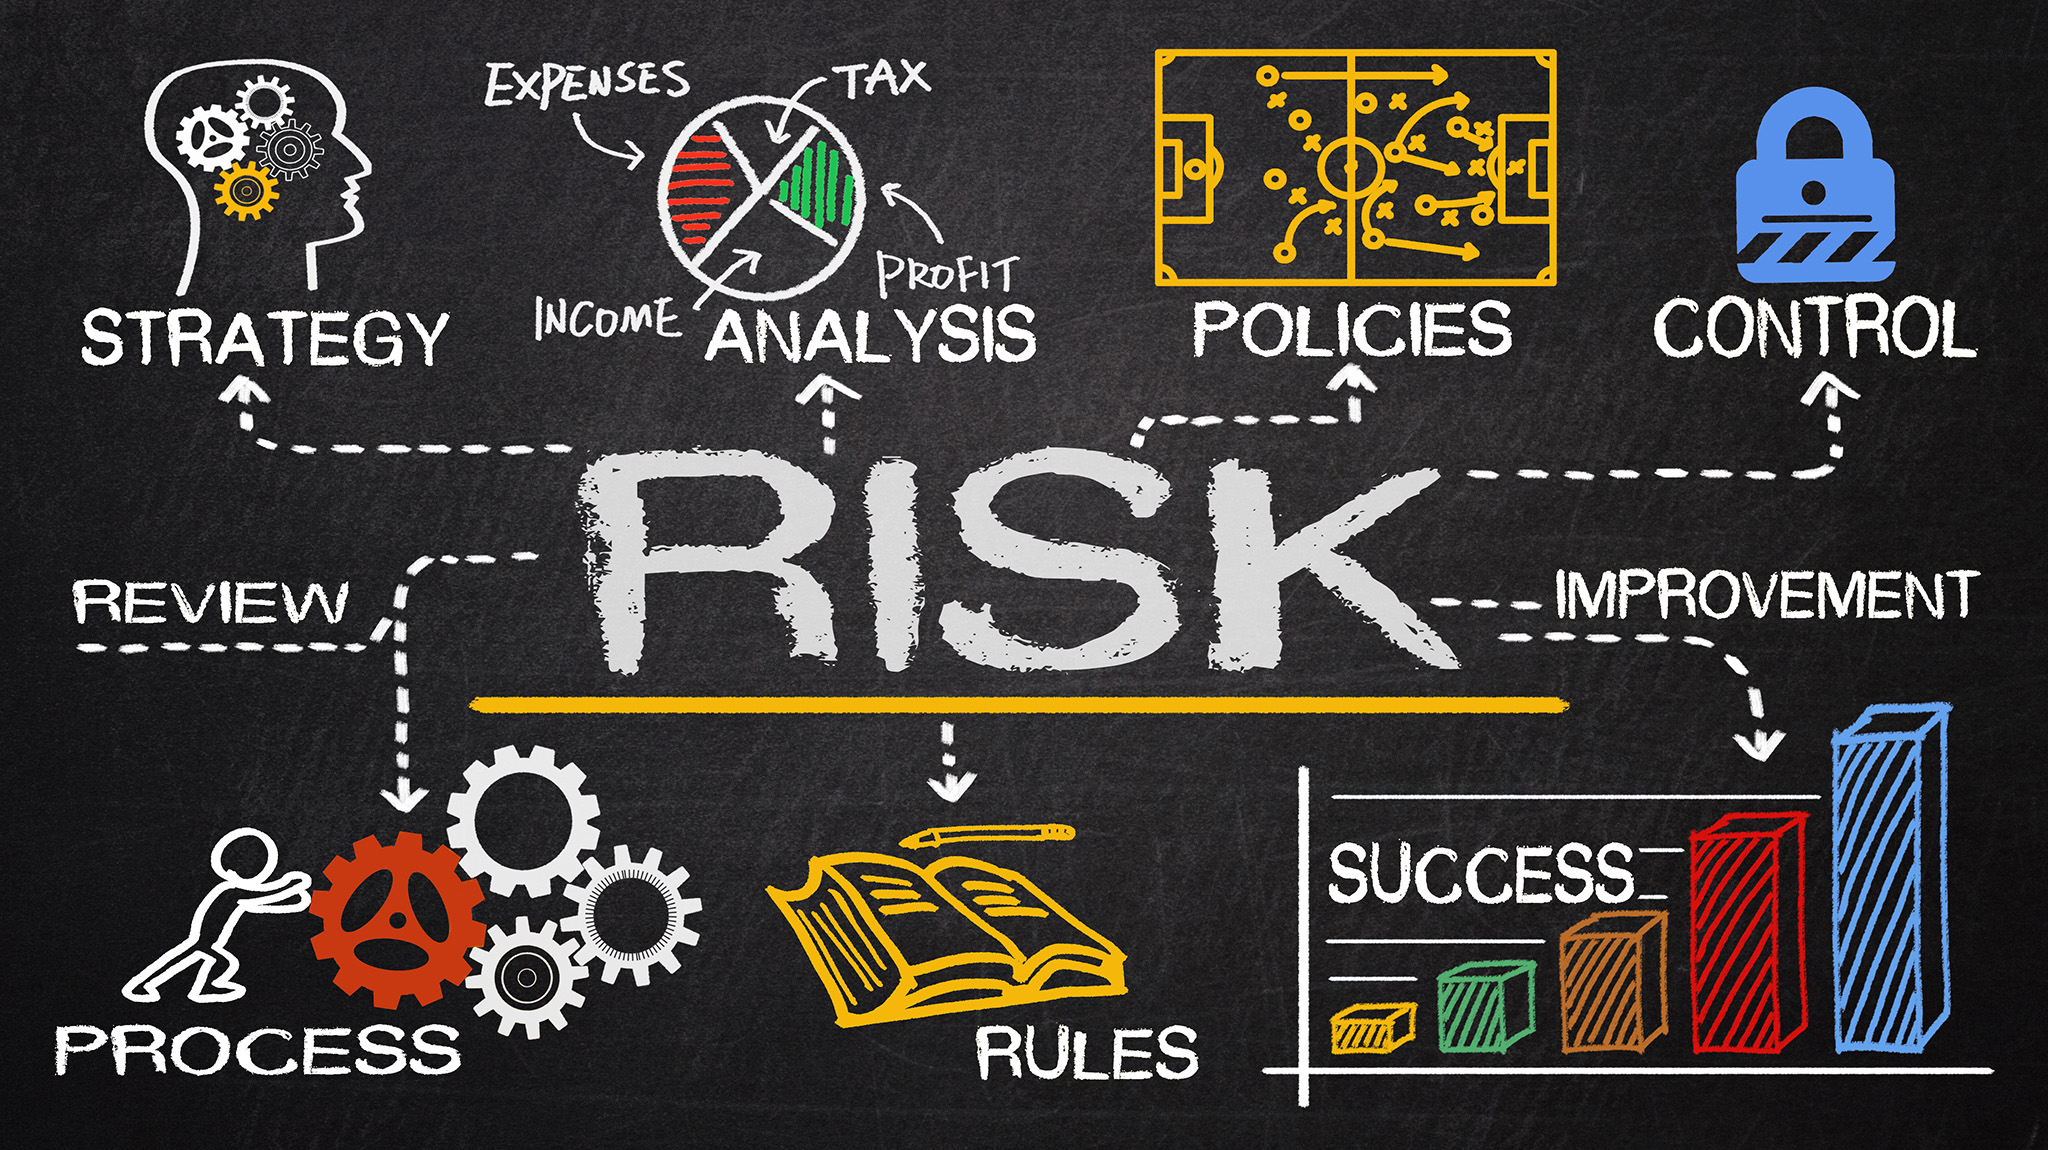 How to Evaluate Offshore Investment Risks